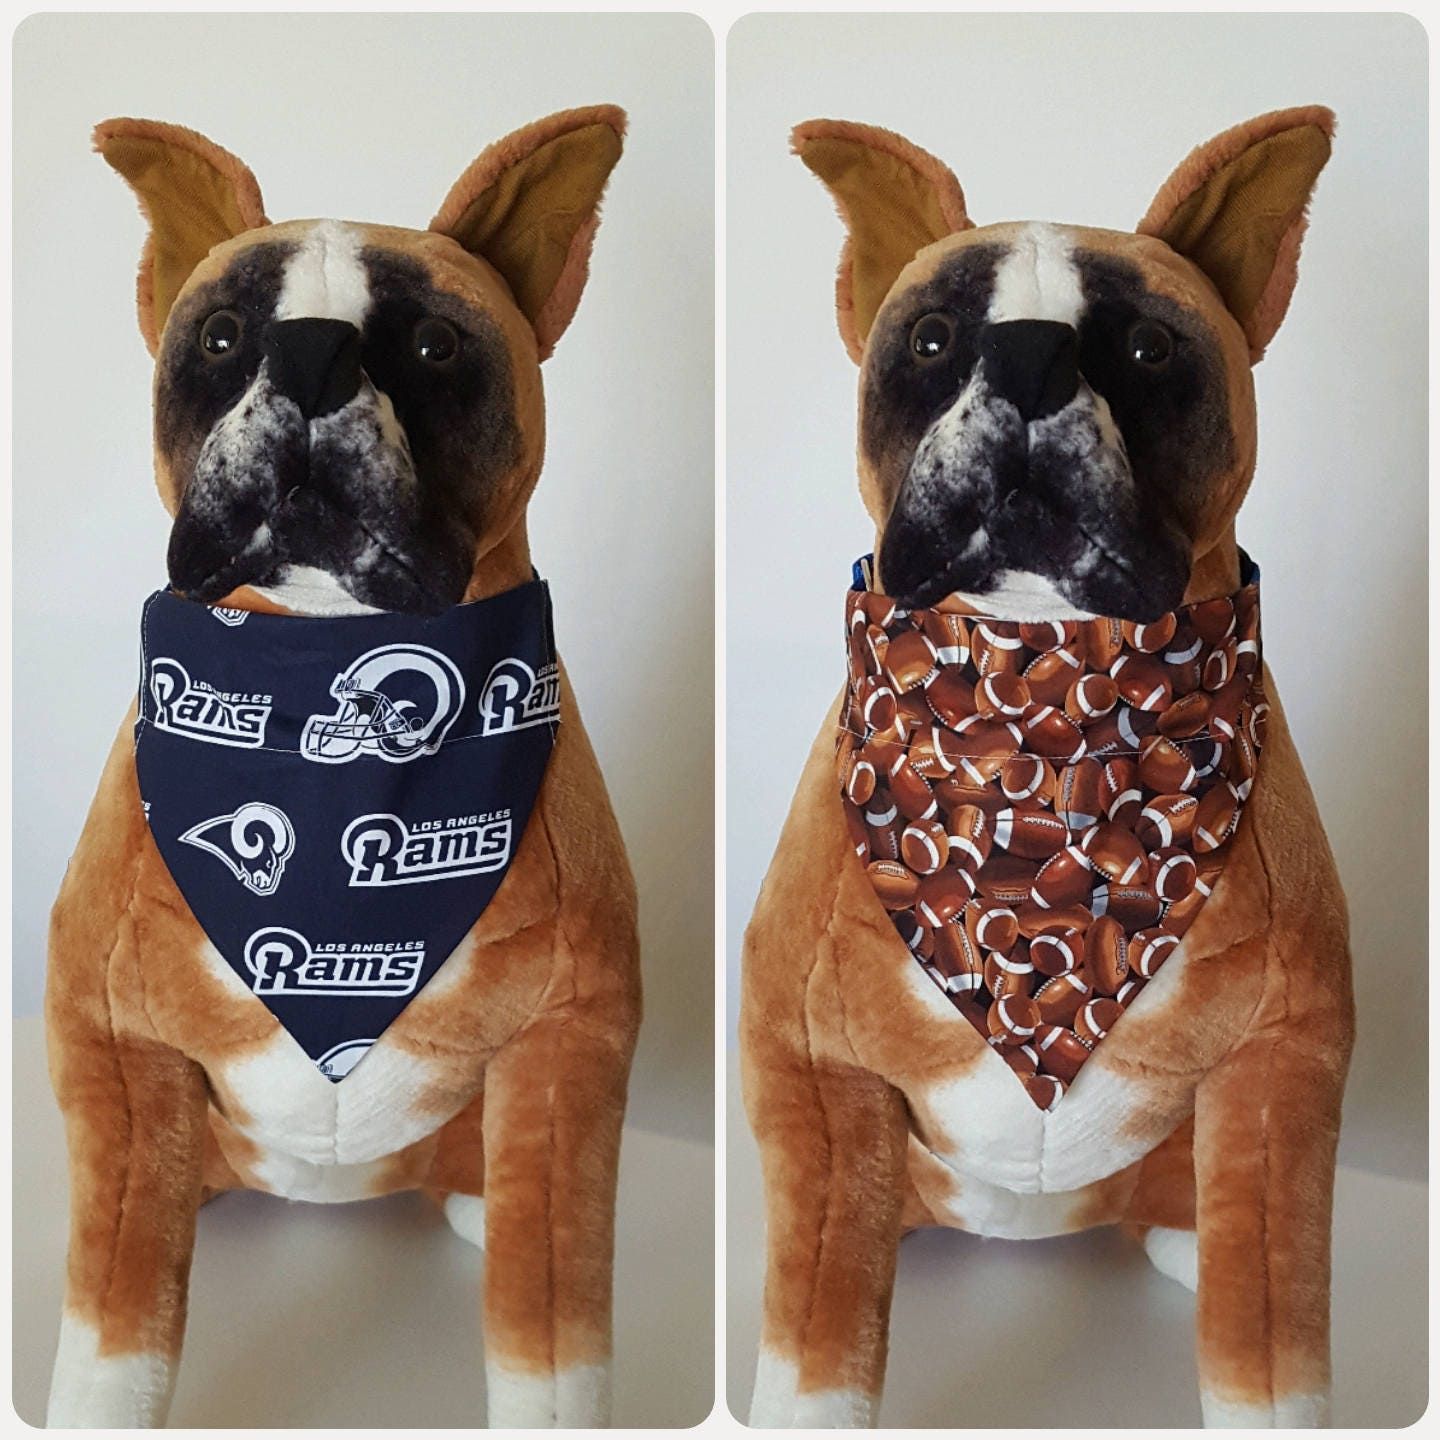 Reversible Bandana, Made With Los Angeles Rams Fabric, Football Bandana Scarf Cat Dog Pet Slip On Over The Collar 2 in One